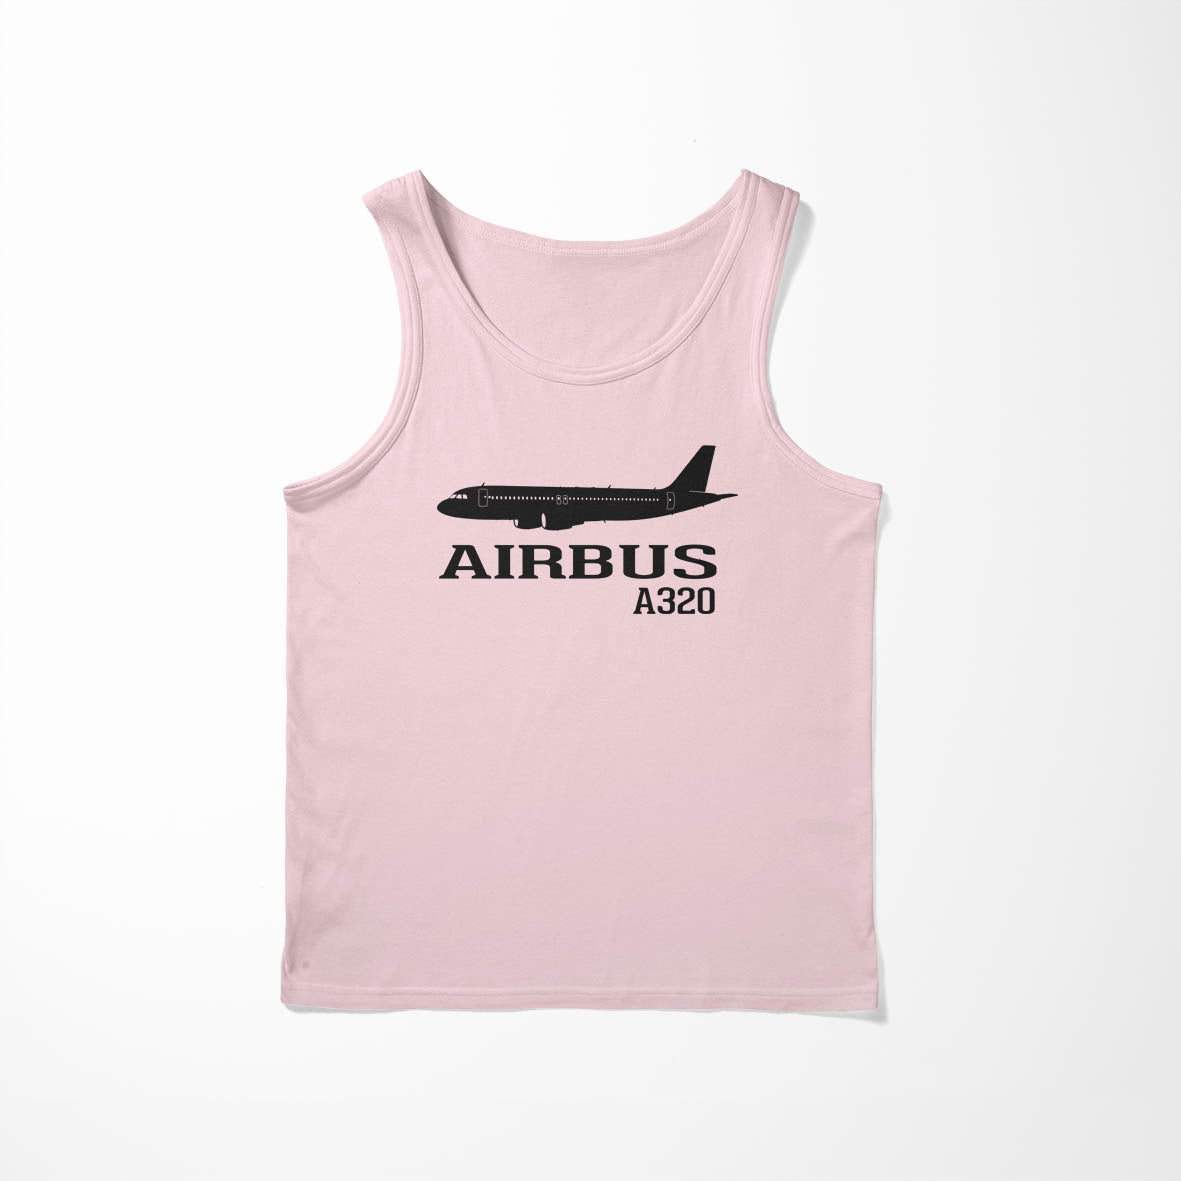 Airbus A320 Printed & Designed Tank Tops